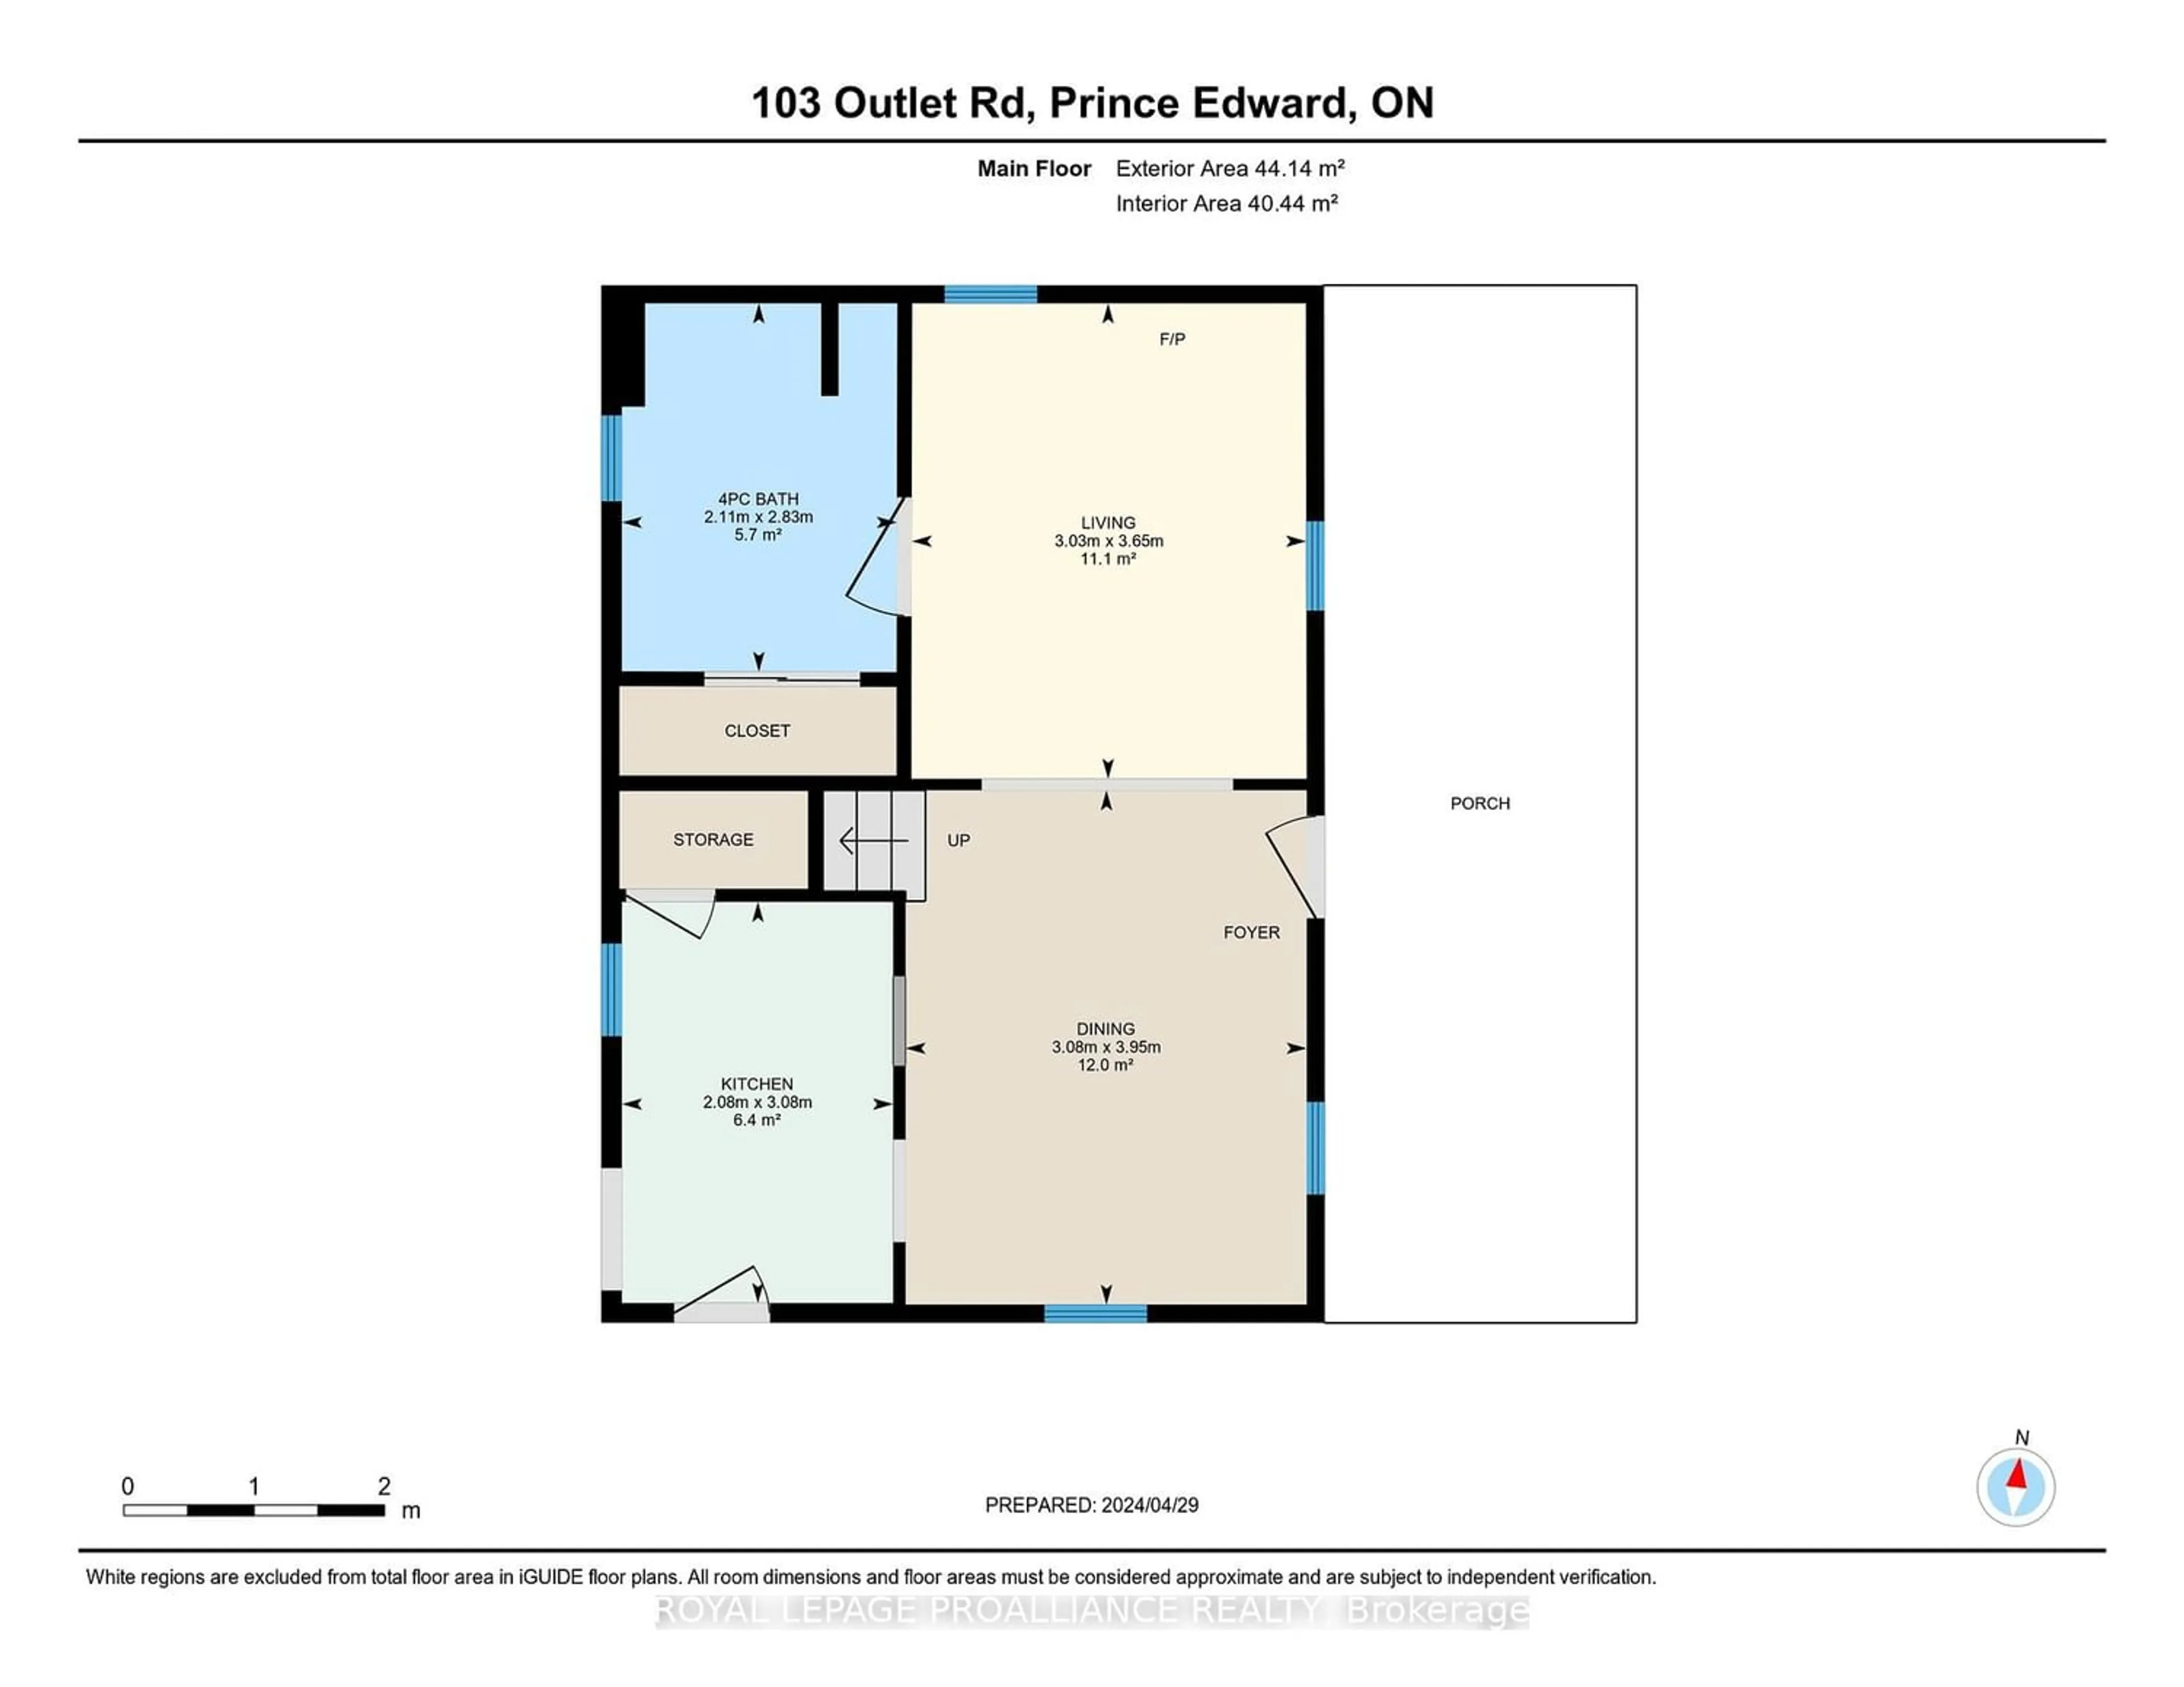 Floor plan for 103 Outlet Rd, Prince Edward County Ontario K0K 1P0